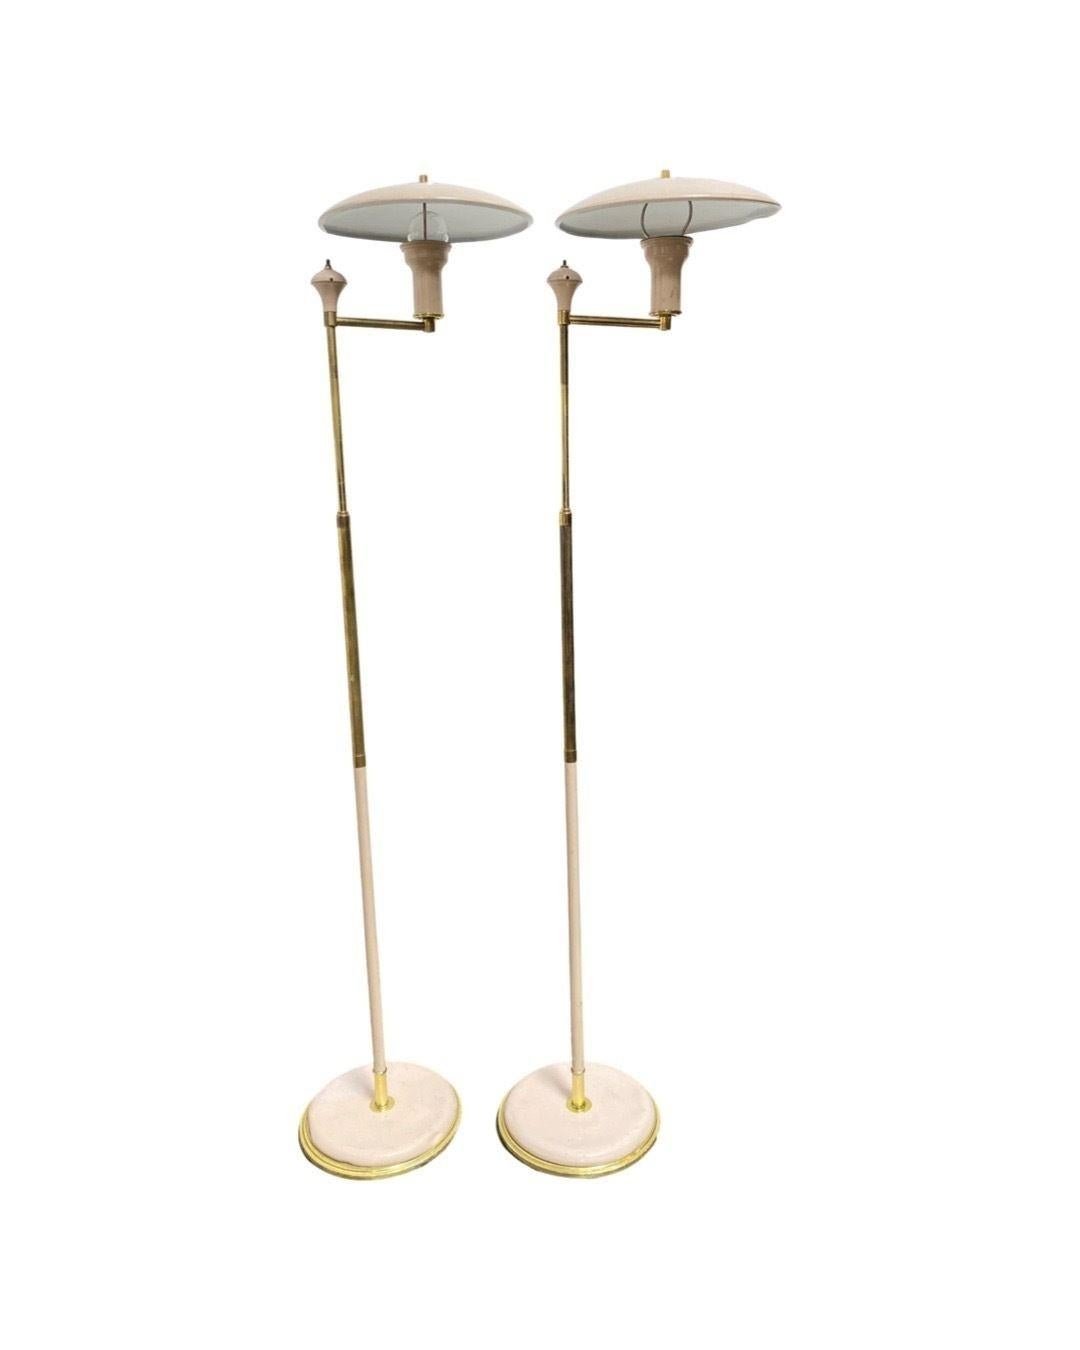 Pair of Gerald Thurston designed, Mid-century Modern saucer-style floor lamps comprised of brass with a neutral nude-colored enamel. The lamps feature a height-adjustable neck and a double bounce shade for soft easy read light.
 
Standard medium